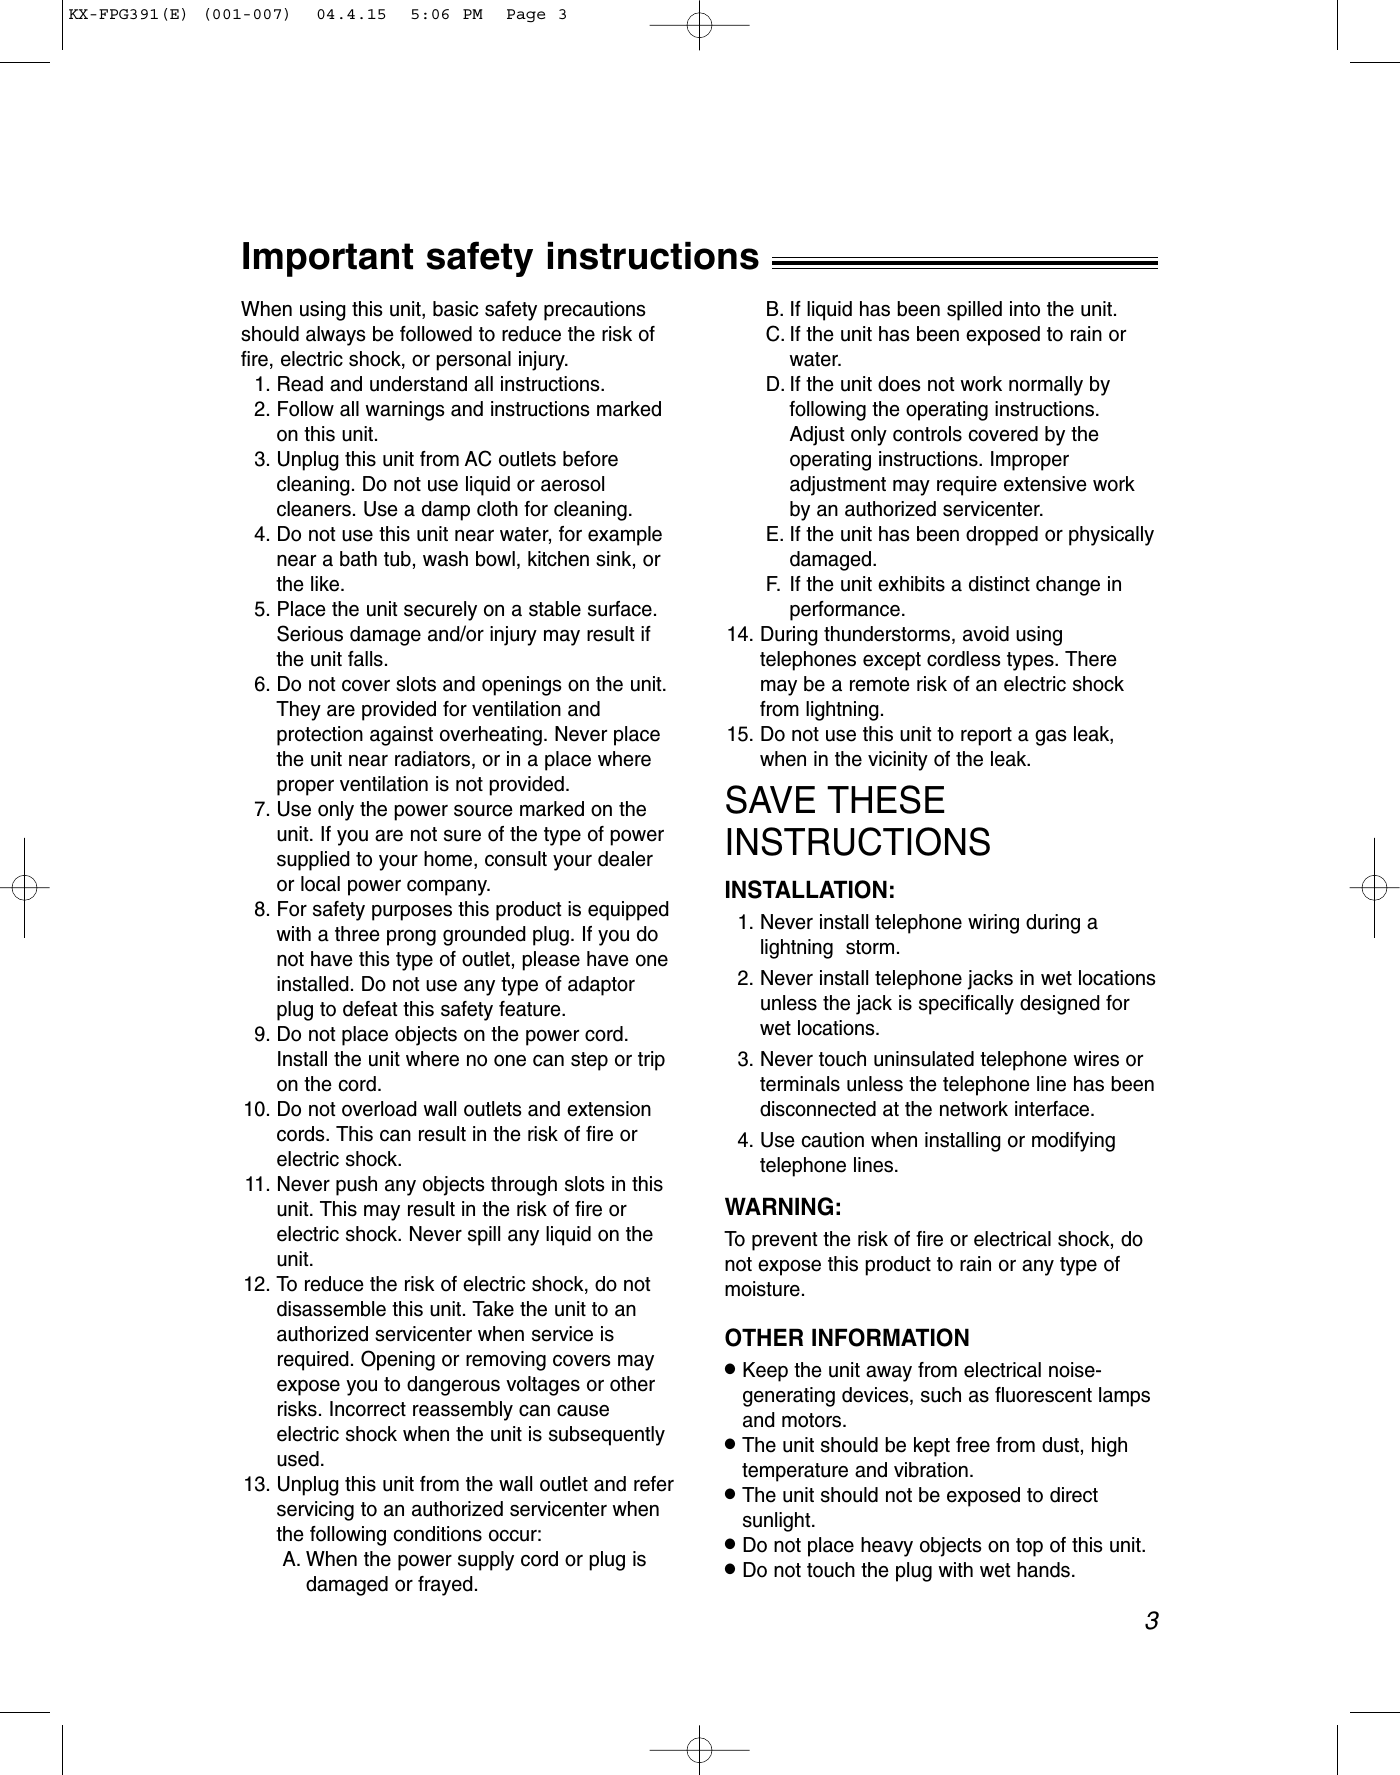 3Important safety instructions!When using this unit, basic safety precautionsshould always be followed to reduce the risk offire, electric shock, or personal injury.1. Read and understand all instructions.2. Follow all warnings and instructions markedon this unit.3. Unplug this unit from AC outlets beforecleaning. Do not use liquid or aerosolcleaners. Use a damp cloth for cleaning.4. Do not use this unit near water, for examplenear a bath tub, wash bowl, kitchen sink, orthe like.5. Place the unit securely on a stable surface.Serious damage and/or injury may result ifthe unit falls.6. Do not cover slots and openings on the unit.They are provided for ventilation andprotection against overheating. Never placethe unit near radiators, or in a place whereproper ventilation is not provided.7. Use only the power source marked on theunit. If you are not sure of the type of powersupplied to your home, consult your dealeror local power company.8. For safety purposes this product is equippedwith a three prong grounded plug. If you donot have this type of outlet, please have oneinstalled. Do not use any type of adaptorplug to defeat this safety feature.9. Do not place objects on the power cord.Install the unit where no one can step or tripon the cord.10. Do not overload wall outlets and extensioncords. This can result in the risk of fire orelectric shock.11. Never push any objects through slots in thisunit. This may result in the risk of fire orelectric shock. Never spill any liquid on theunit.12. To reduce the risk of electric shock, do notdisassemble this unit. Take the unit to anauthorized servicenter when service isrequired. Opening or removing covers mayexpose you to dangerous voltages or otherrisks. Incorrect reassembly can causeelectric shock when the unit is subsequentlyused.13. Unplug this unit from the wall outlet and referservicing to an authorized servicenter whenthe following conditions occur:A. When the power supply cord or plug isdamaged or frayed.B. If liquid has been spilled into the unit.C. If the unit has been exposed to rain orwater.D. If the unit does not work normally byfollowing the operating instructions.Adjust only controls covered by theoperating instructions. Improperadjustment may require extensive workby an authorized servicenter.E. If the unit has been dropped or physicallydamaged.F. If the unit exhibits a distinct change inperformance.14. During thunderstorms, avoid usingtelephones except cordless types. Theremay be a remote risk of an electric shockfrom lightning.15. Do not use this unit to report a gas leak,when in the vicinity of the leak.SAVE THESEINSTRUCTIONSINSTALLATION:1. Never install telephone wiring during alightning  storm.2. Never install telephone jacks in wet locationsunless the jack is specifically designed forwet locations. 3. Never touch uninsulated telephone wires orterminals unless the telephone line has beendisconnected at the network interface.4. Use caution when installing or modifyingtelephone lines.WARNING:To prevent the risk of fire or electrical shock, donot expose this product to rain or any type ofmoisture.OTHER INFORMATION●Keep the unit away from electrical noise-generating devices, such as fluorescent lampsand motors.●The unit should be kept free from dust, hightemperature and vibration.●The unit should not be exposed to directsunlight.●Do not place heavy objects on top of this unit.●Do not touch the plug with wet hands.KX-FPG391(E) (001-007)  04.4.15  5:06 PM  Page 3